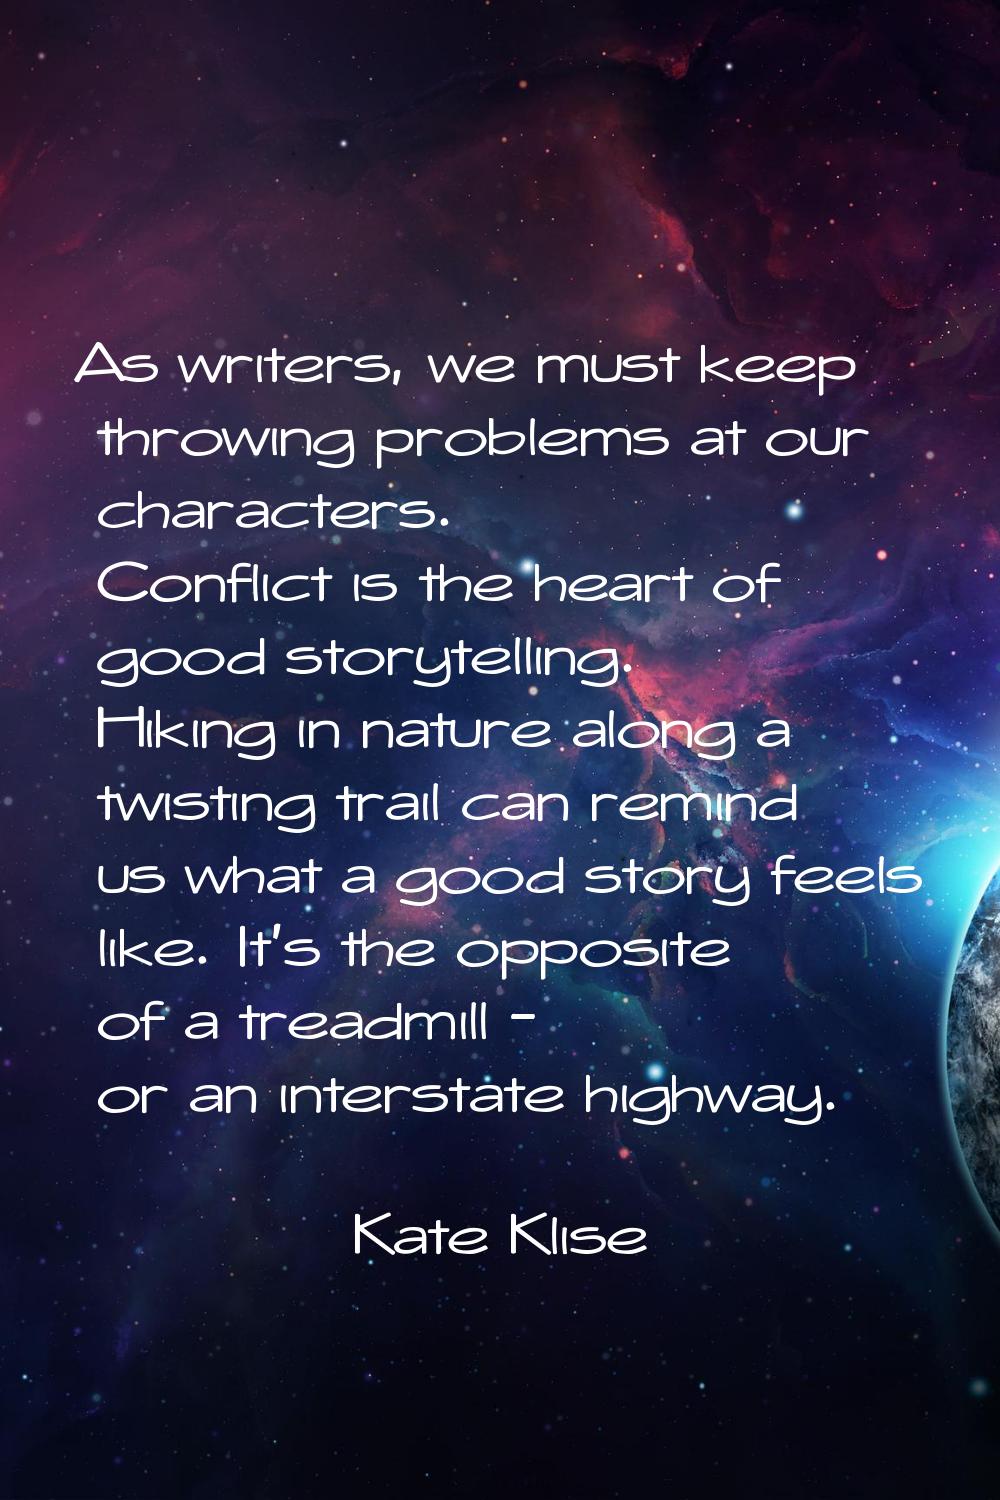 As writers, we must keep throwing problems at our characters. Conflict is the heart of good storyte